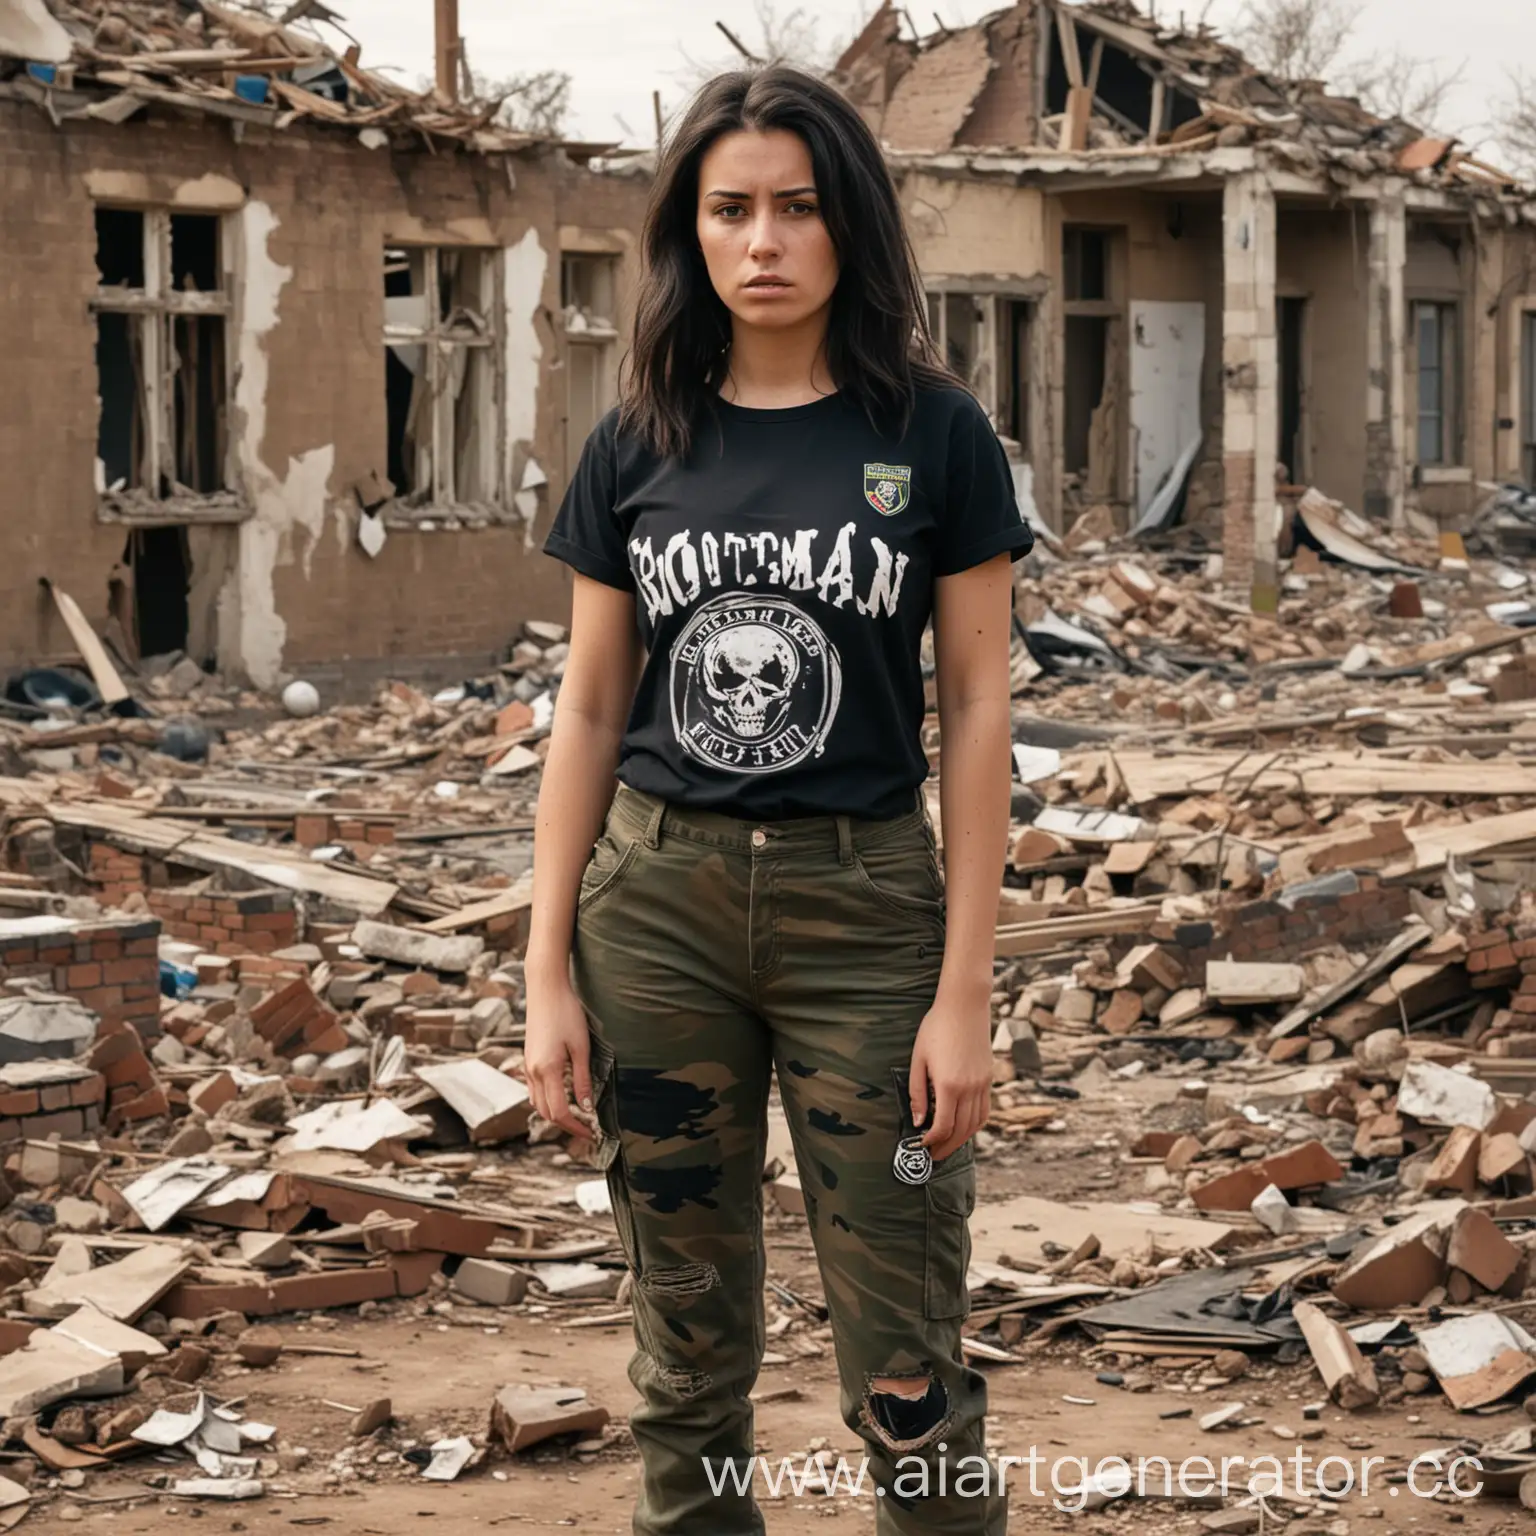 Angry-Female-Soldier-BOOTMAN-Amidst-WarTorn-Homes